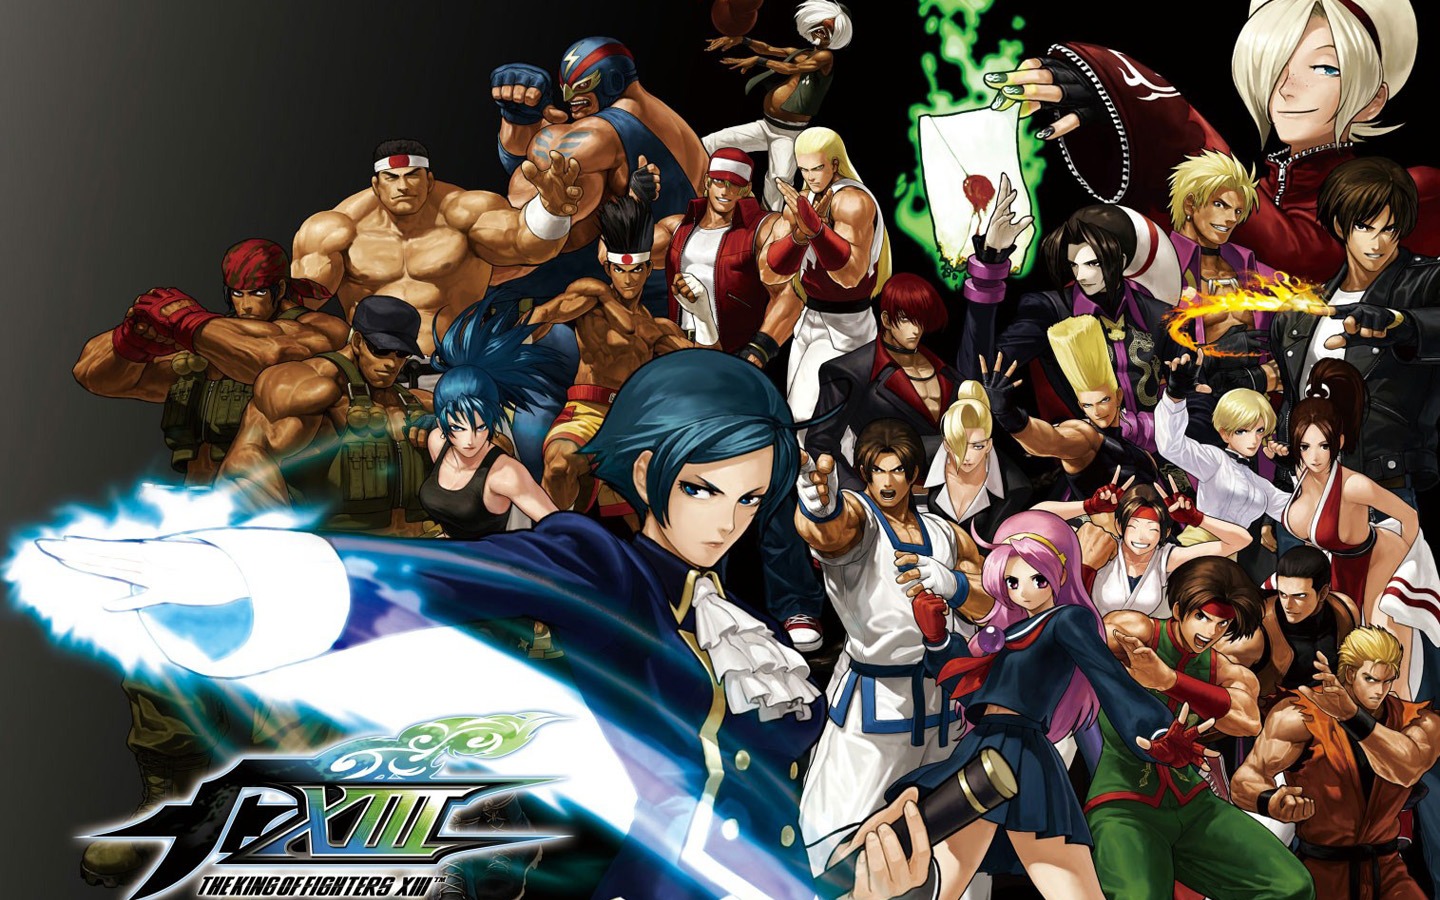 Le roi de wallpapers Fighters XIII #1 - 1440x900